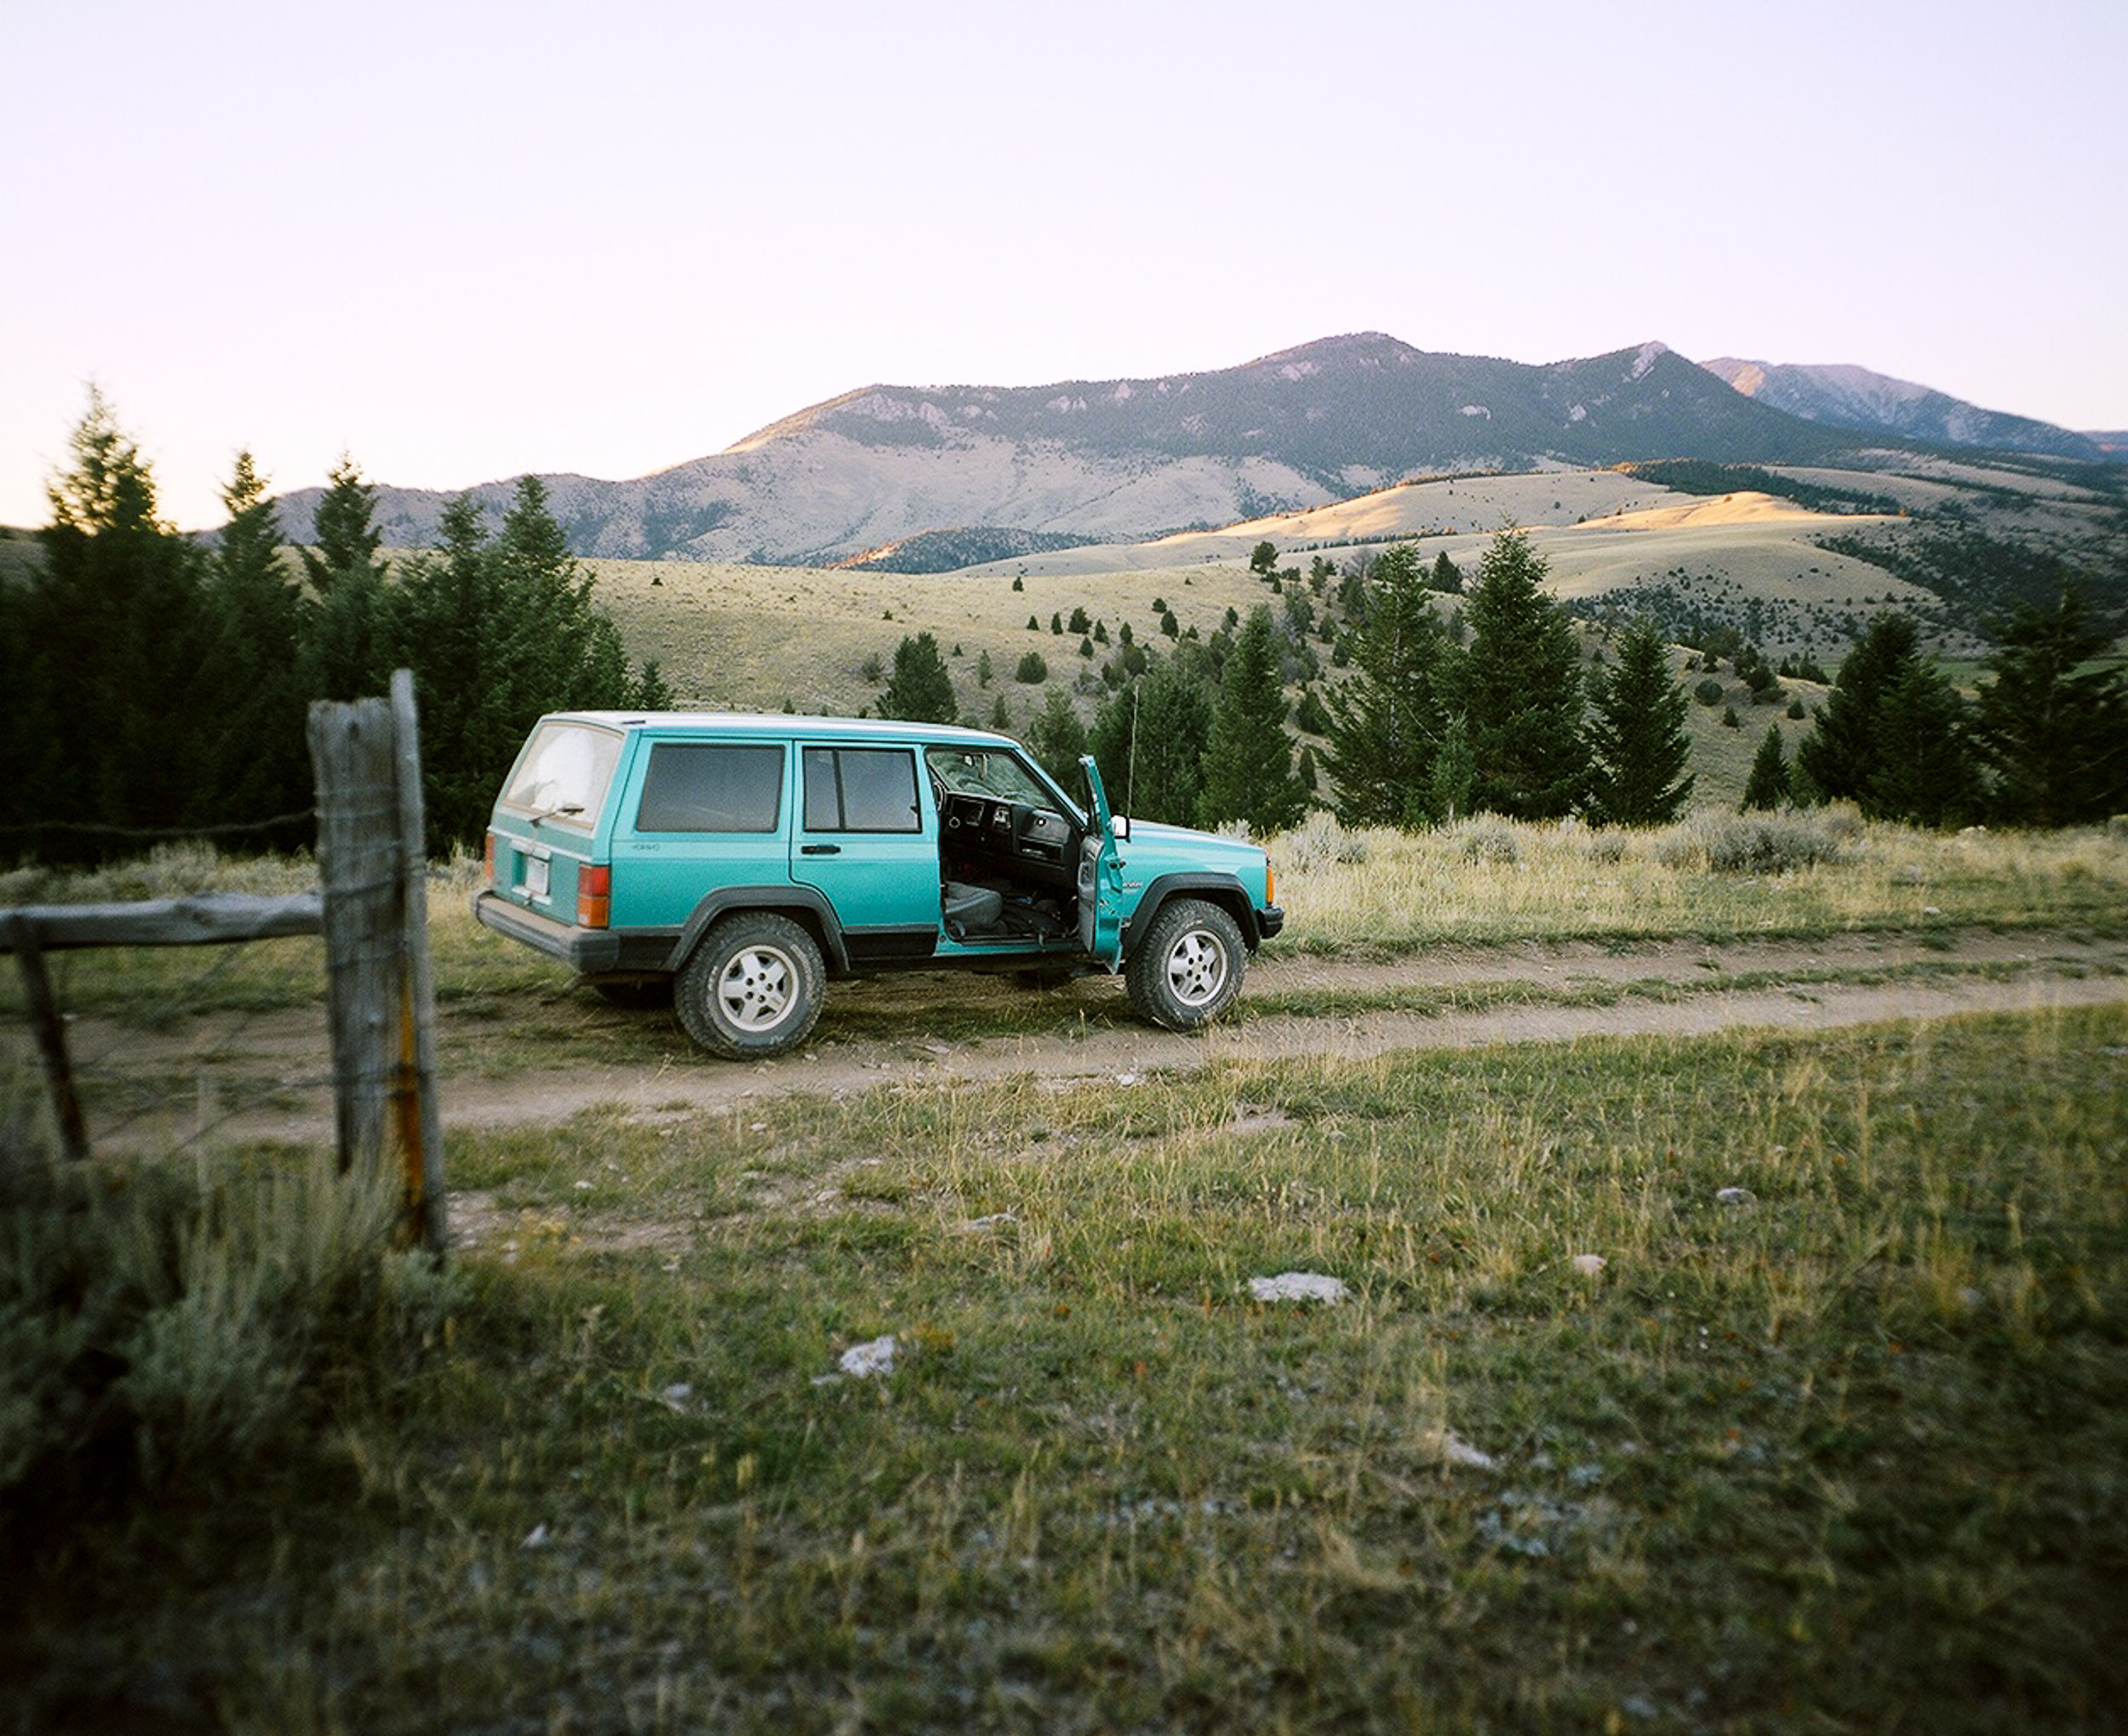 Green Jeep Cherokee with an open passenger door parked on a dirt road in Montana